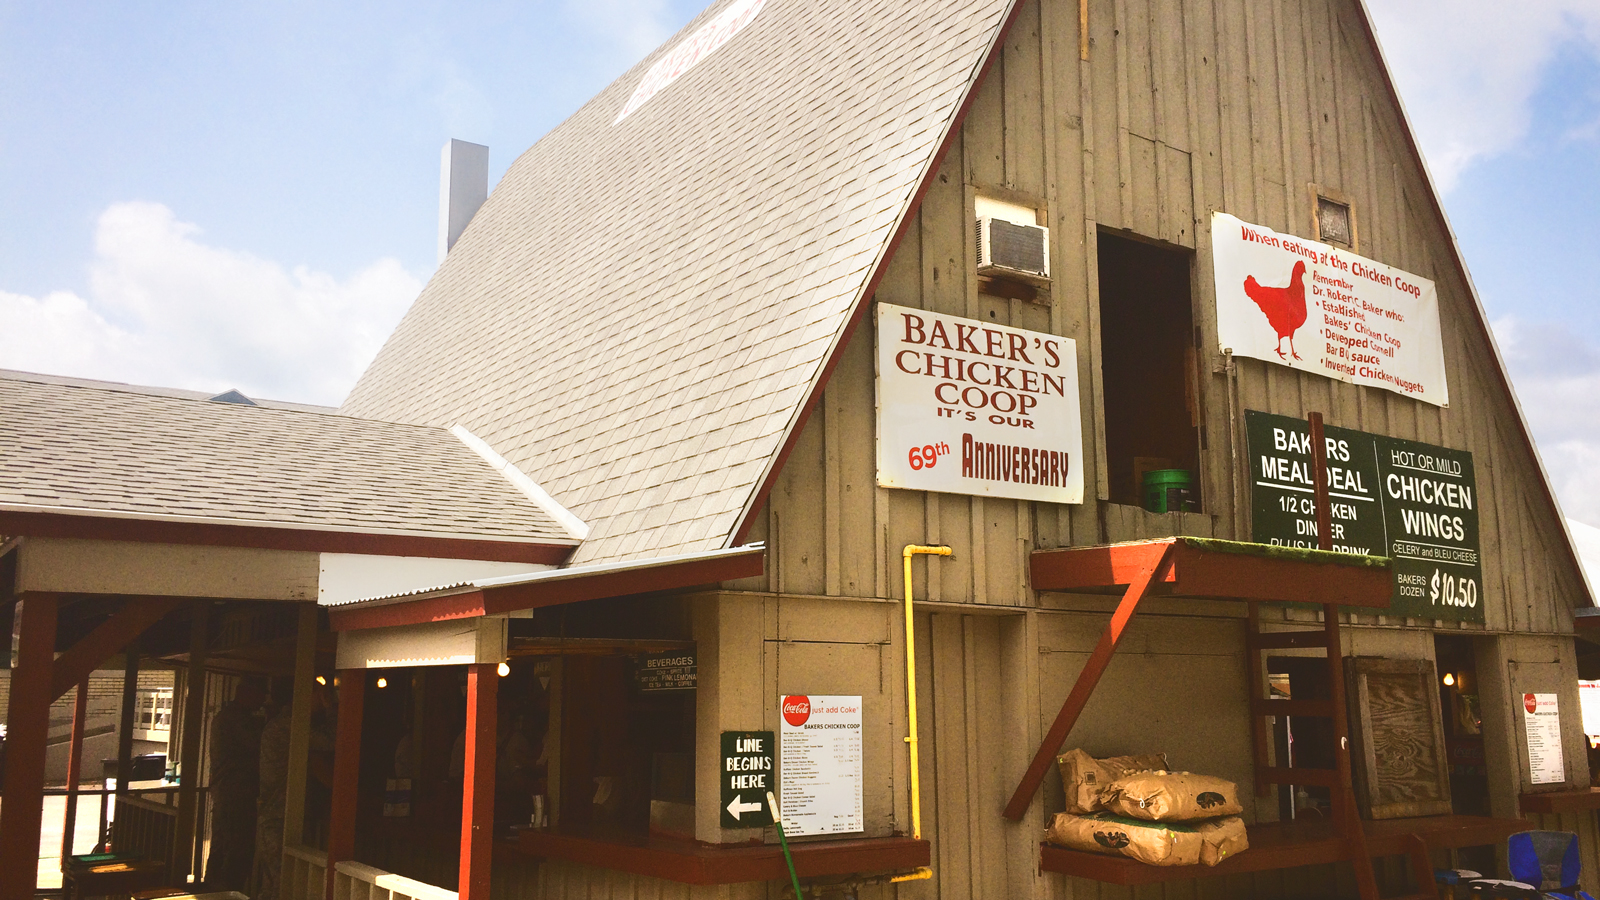 Baker’s Chicken Coop at the New York State Fair—a popular destination for decades